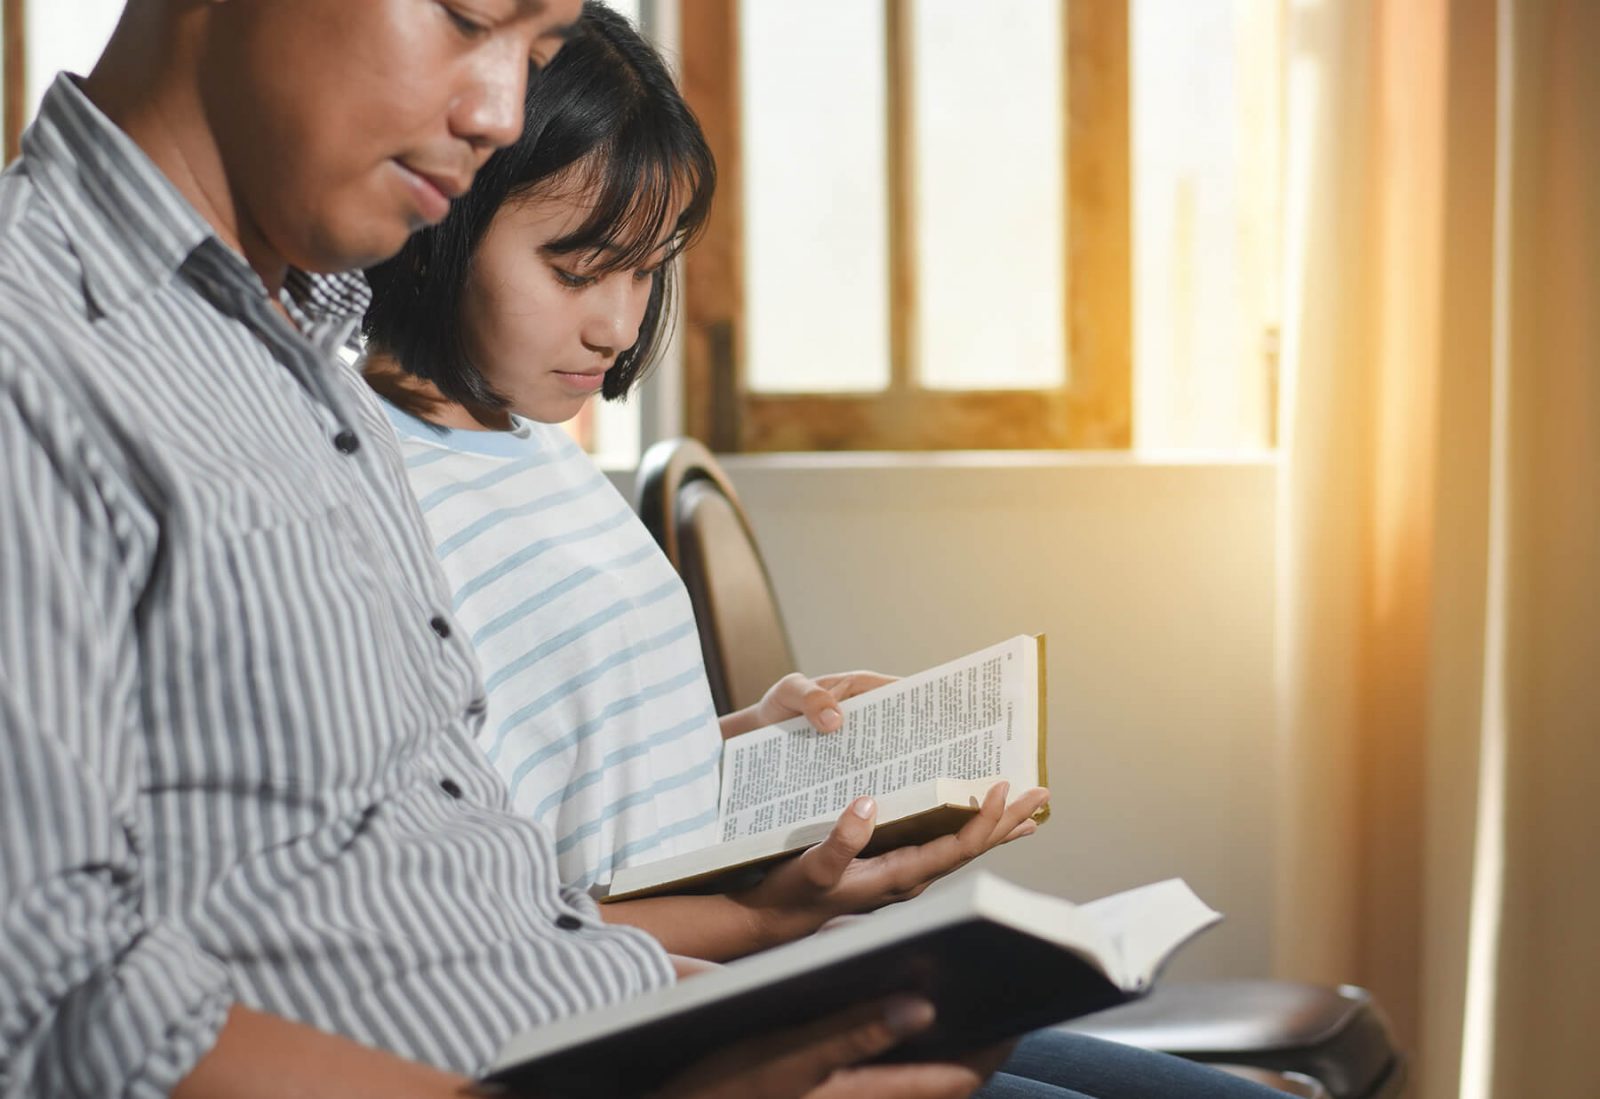 two people reading bibles